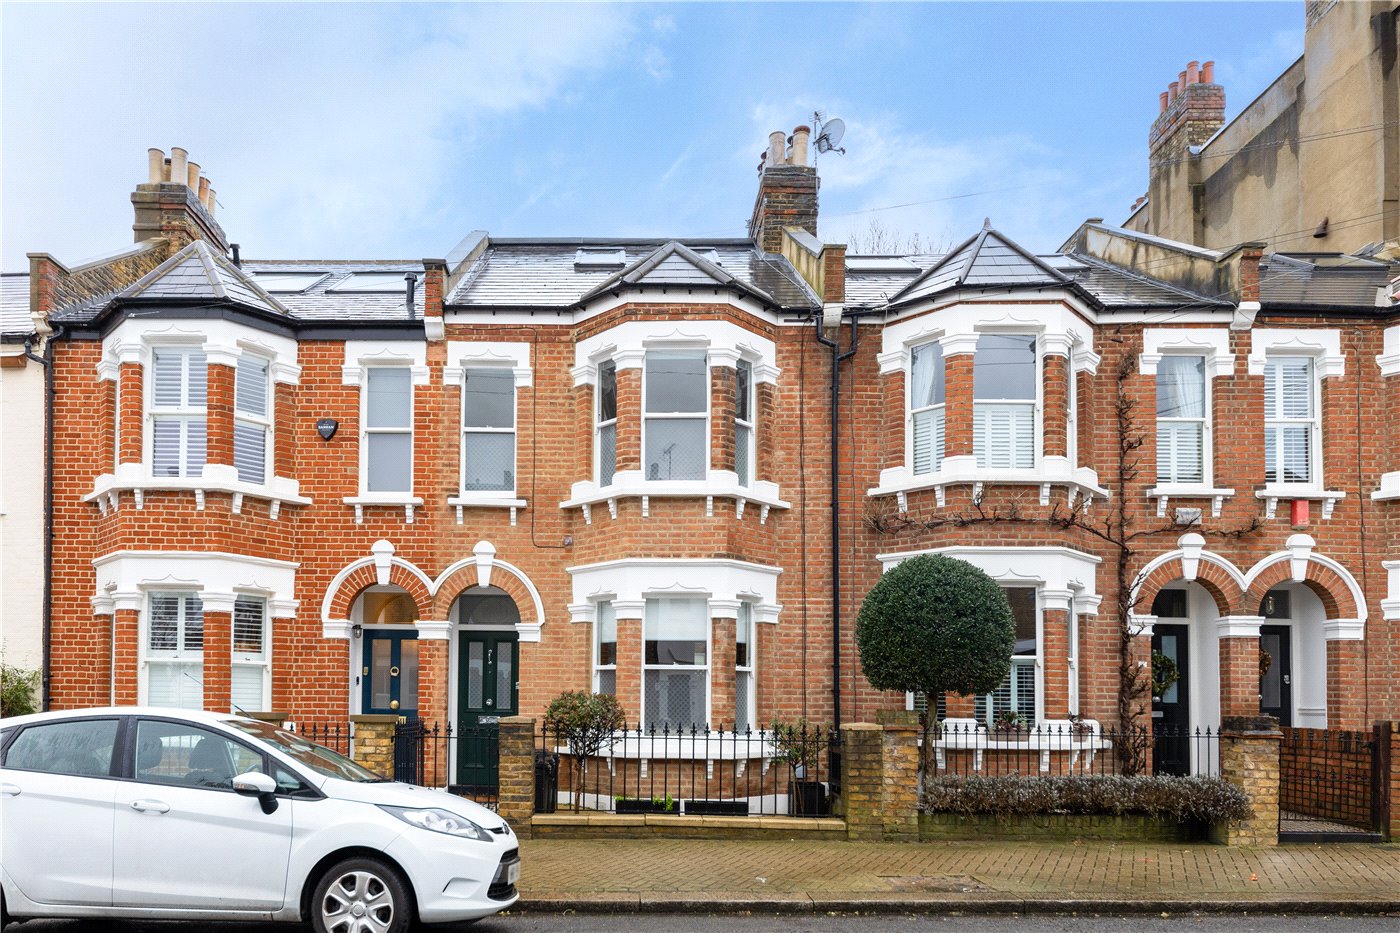 Bective Road, London, SW15 5 bedroom house in London